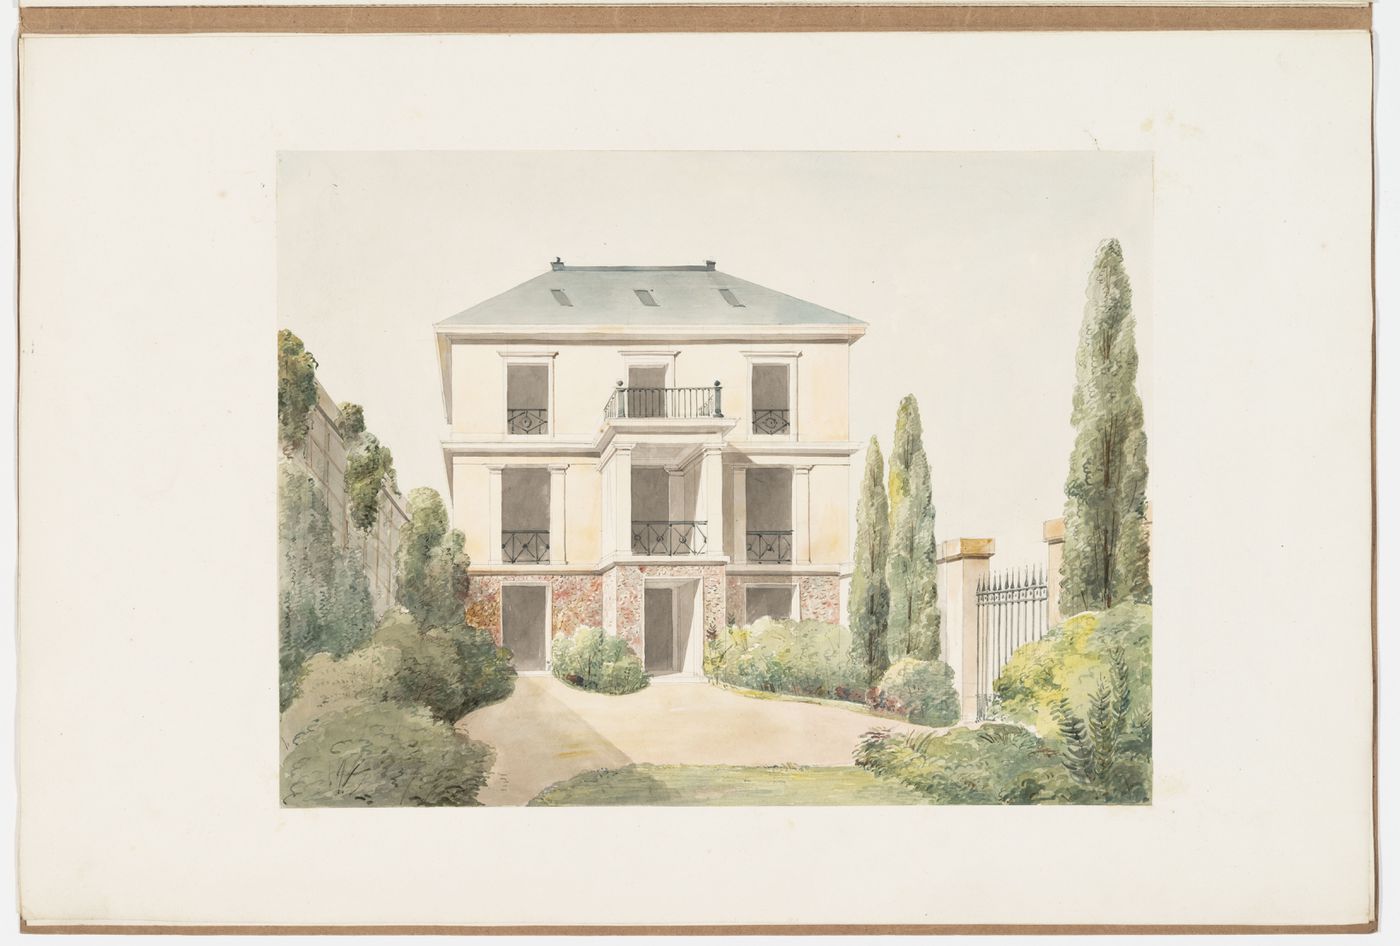 Perspective drawing of a three-storey house